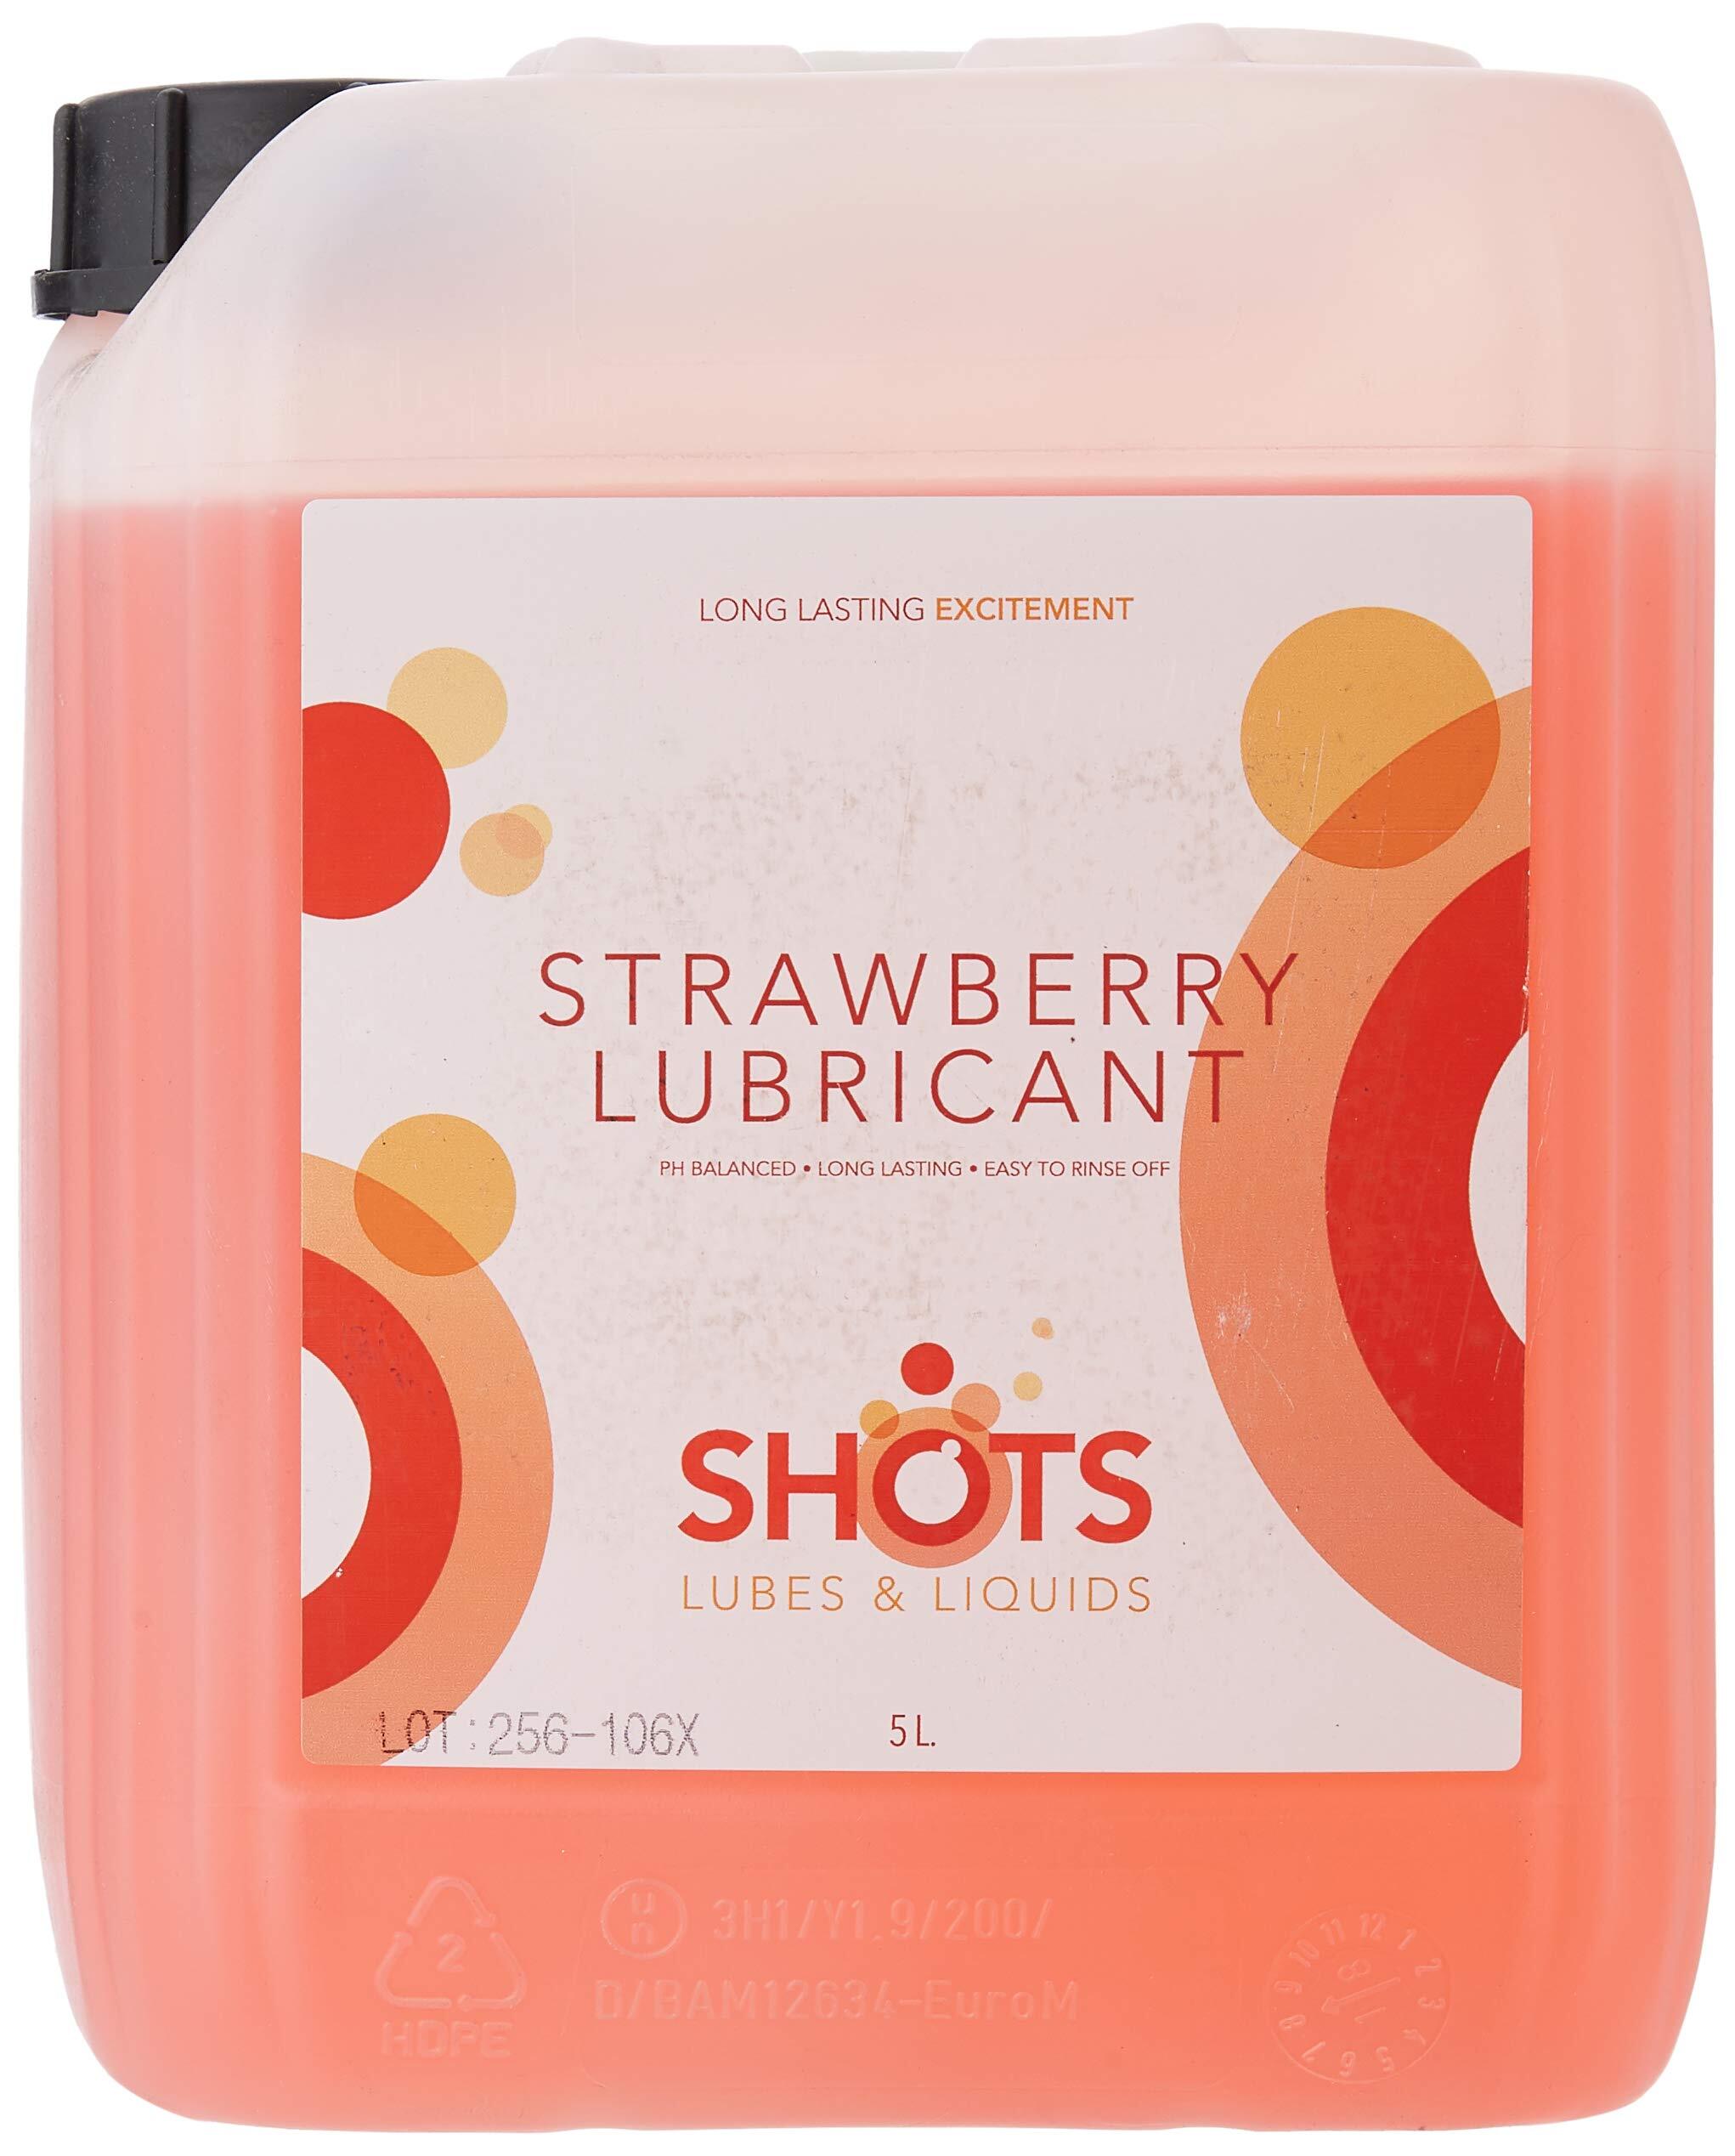 Shots Lubes and Liquids Strawberry Lubricant - 5L